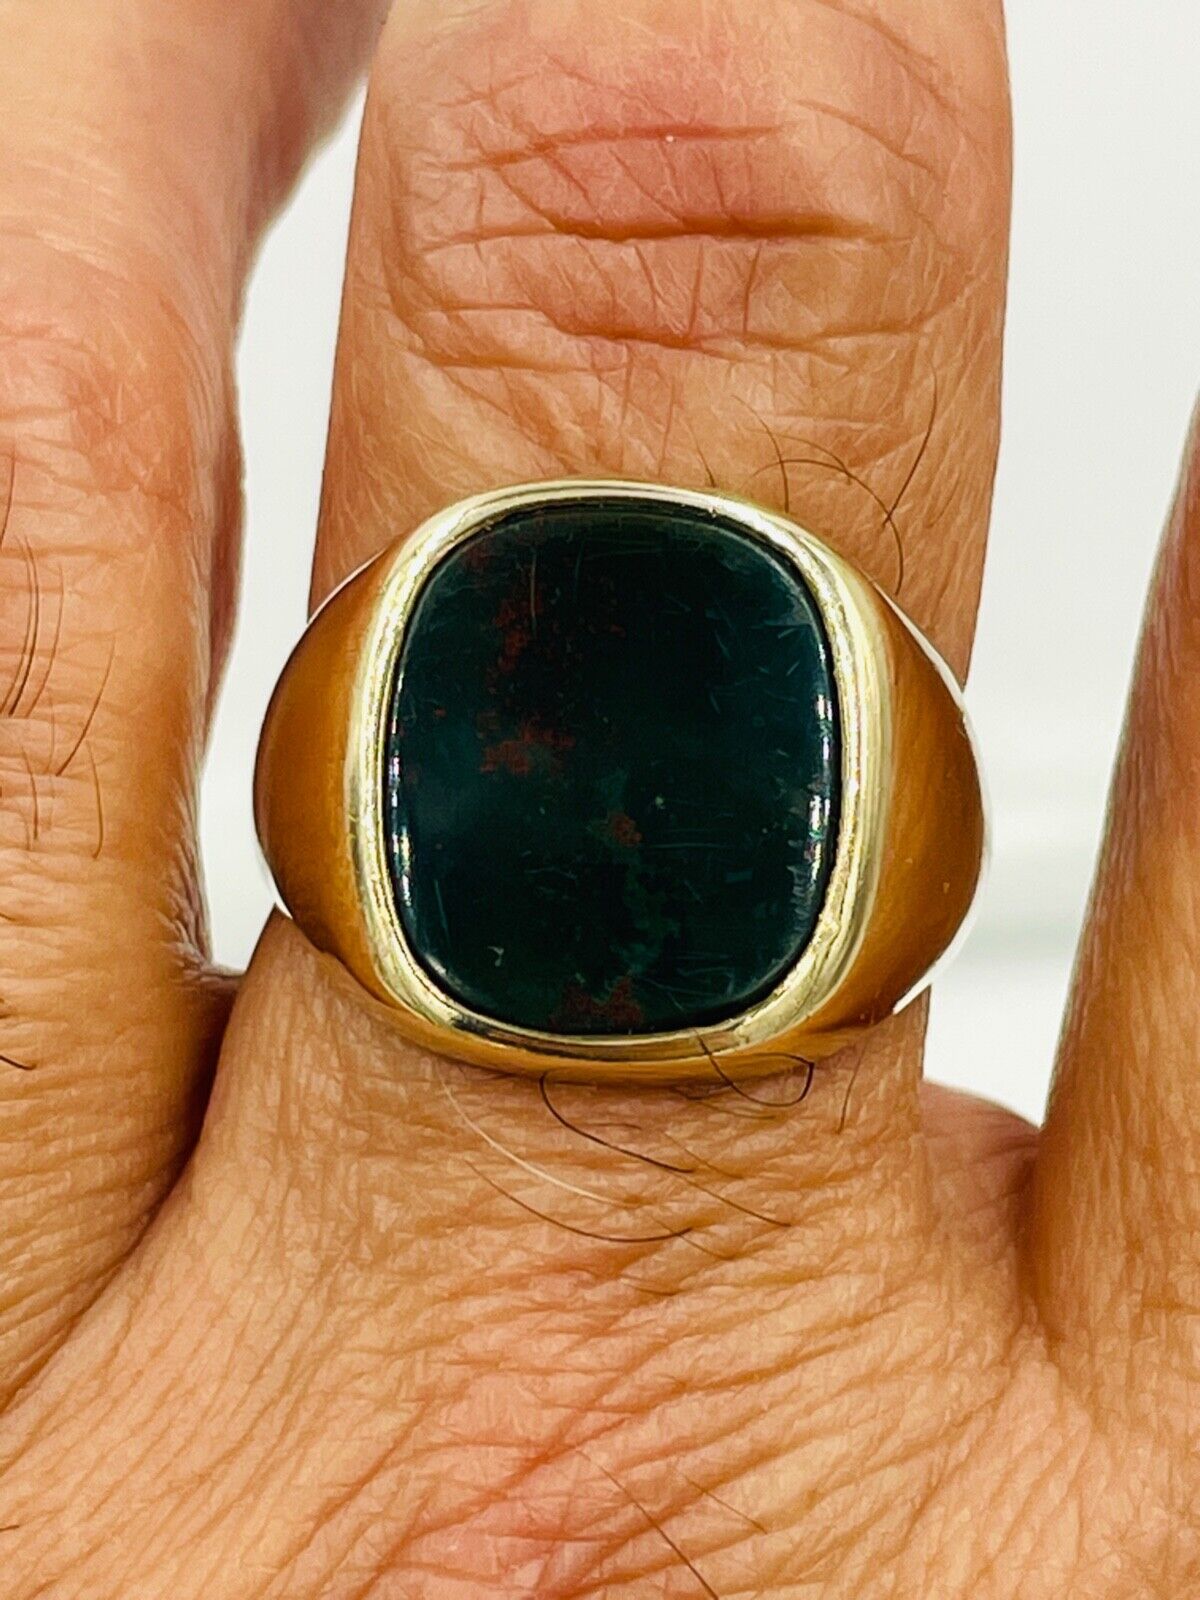 Baden and Foss B&F  10K Gold  Bloodstone Men's Ring. Size 11